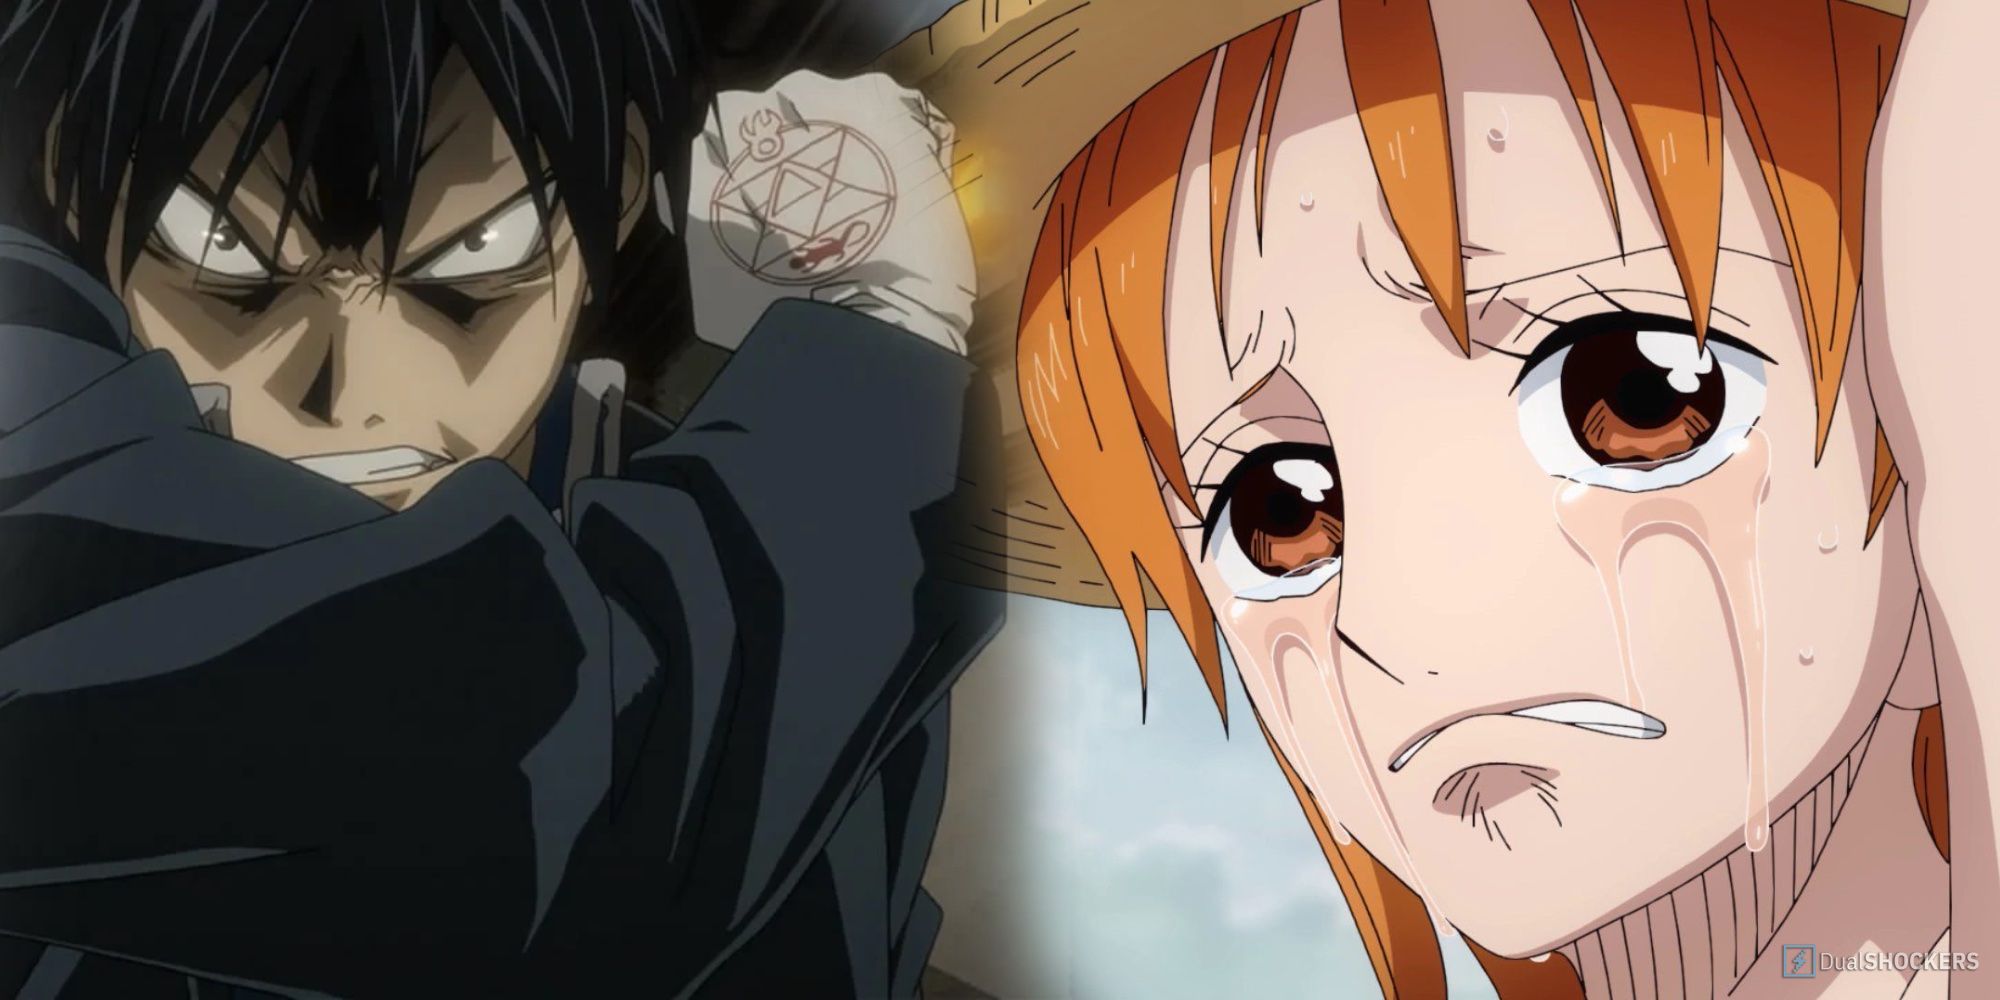 A collage featuring Mustang from Fullmetal Alchemist  attacking, and Nami from One Piece crying